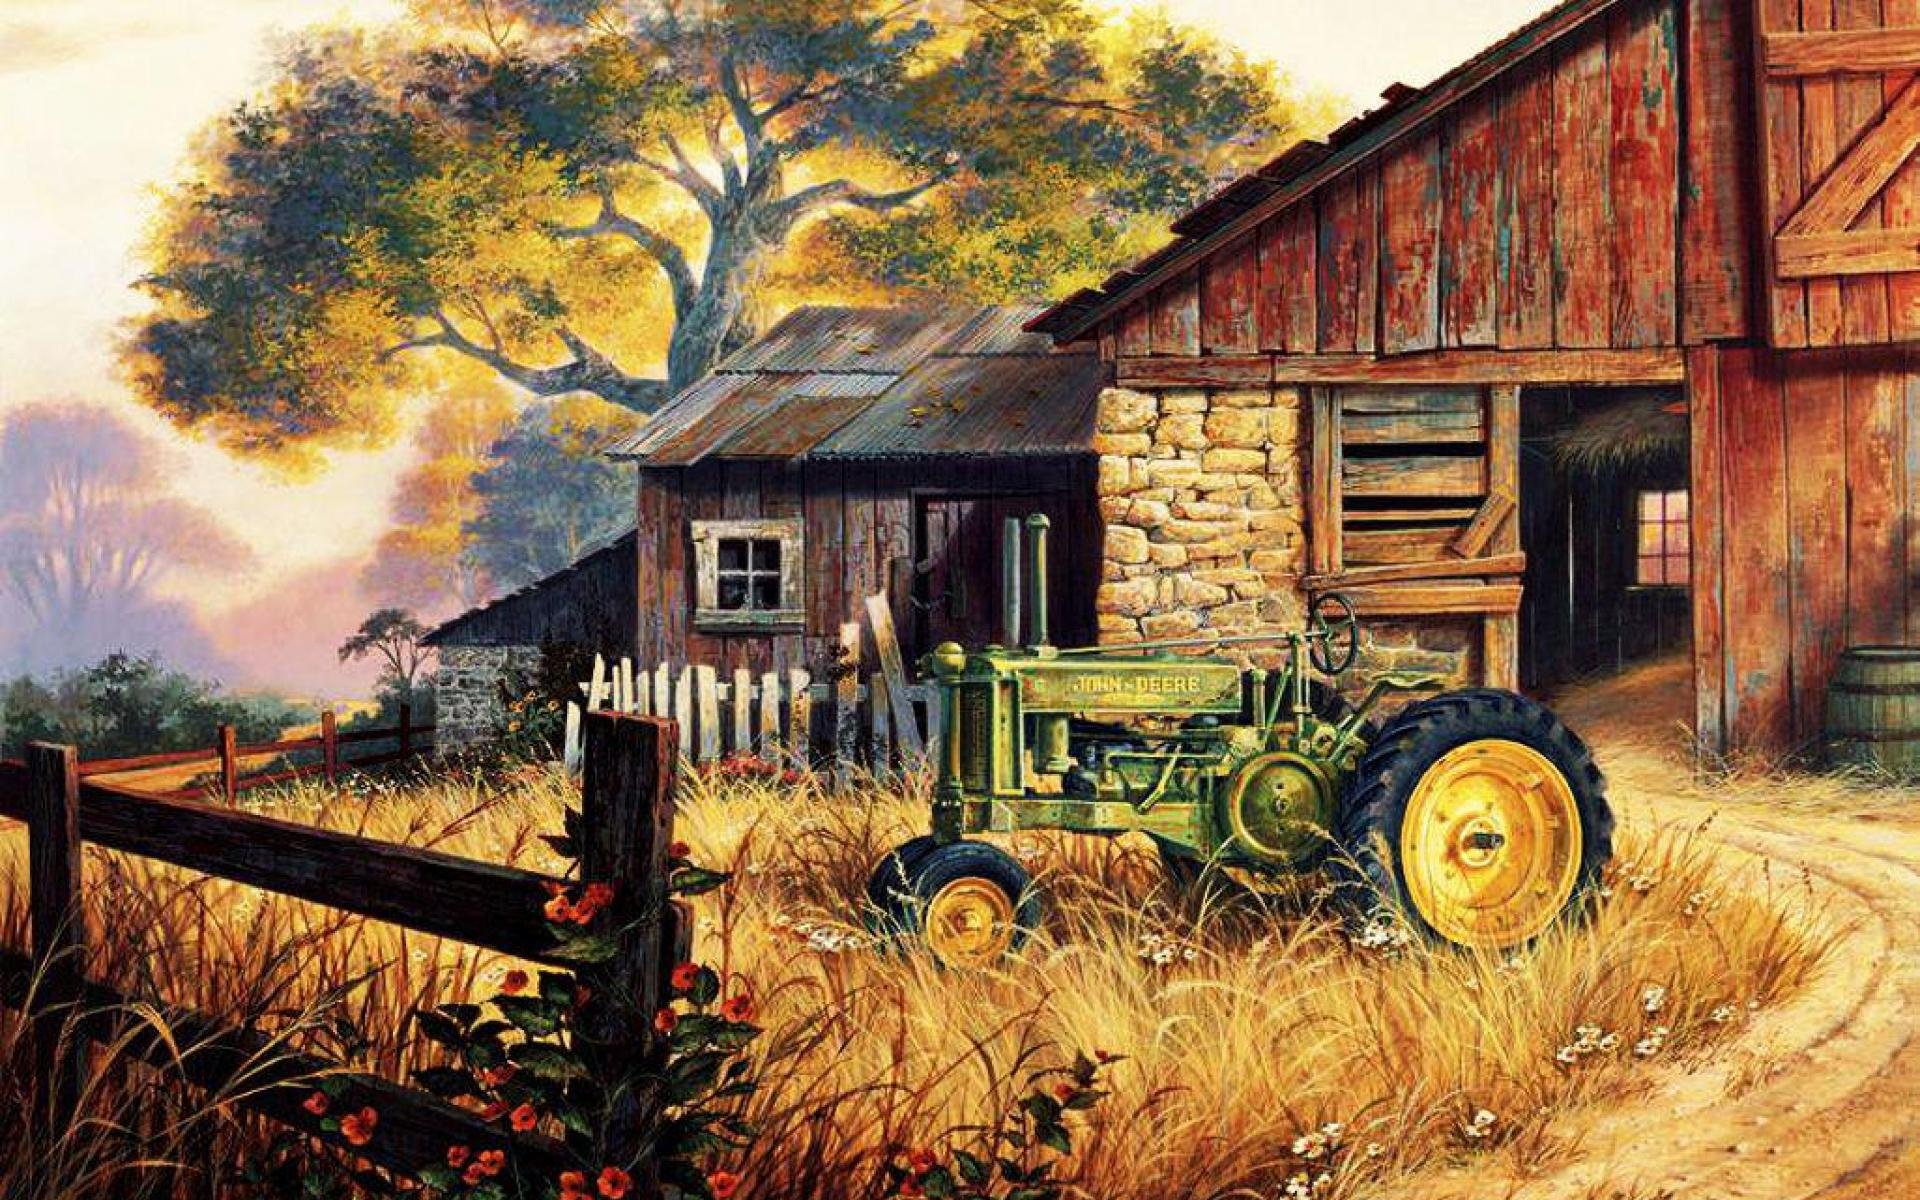 john deere tractor game download for pc